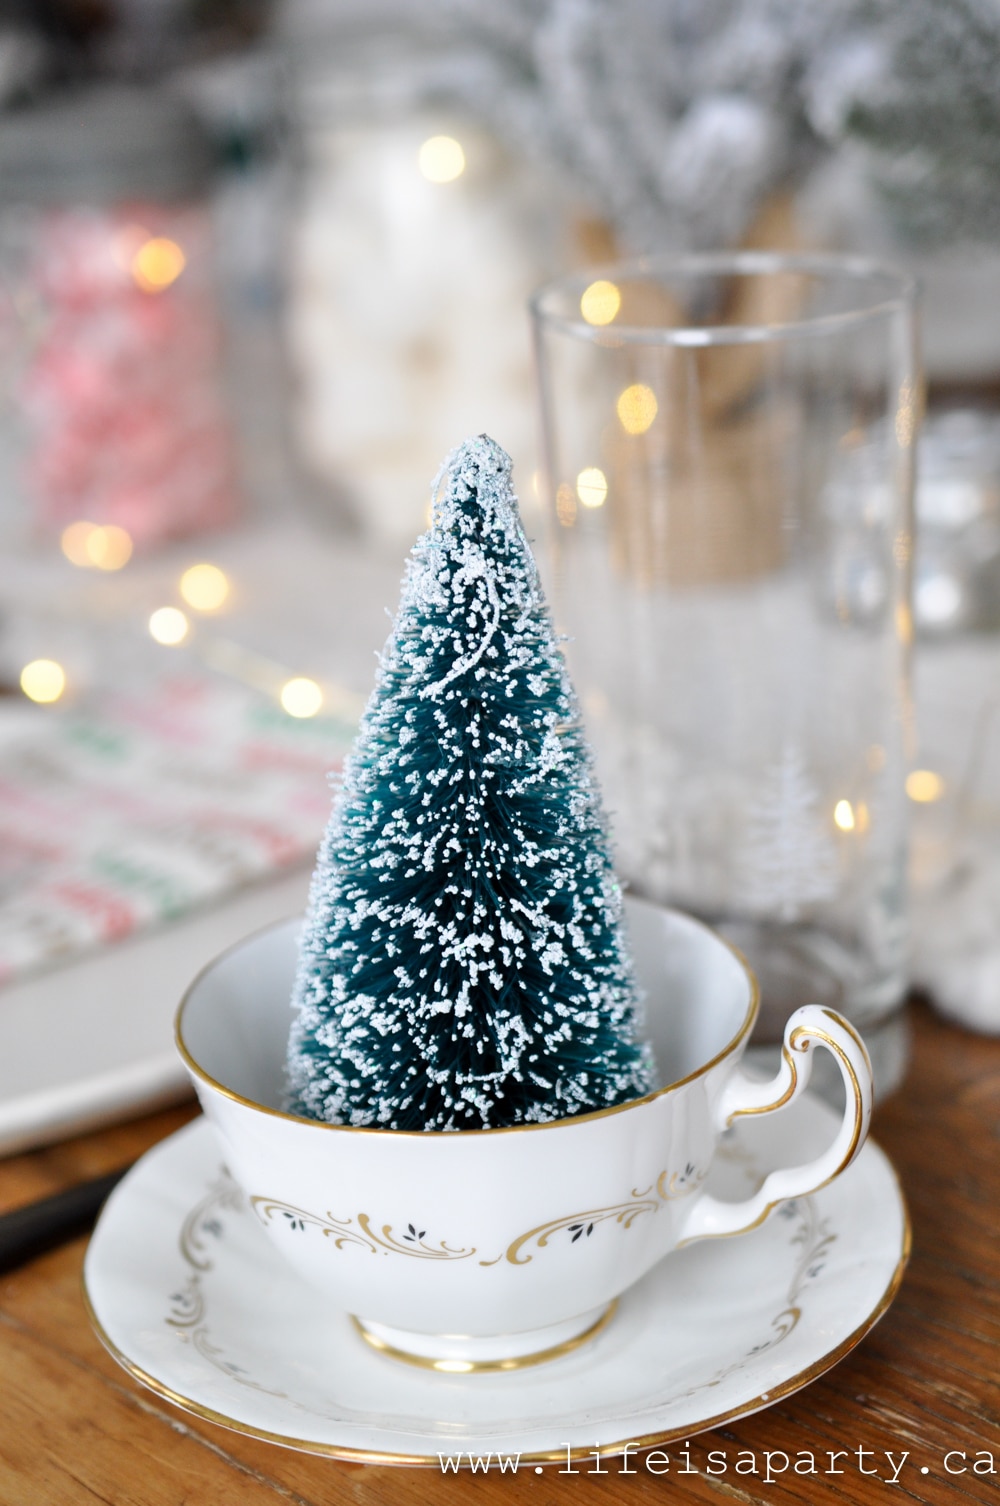 Thrift Store Christmas Table and Thrift Store Tips: beautiful Christmas table put together with thrift store finds, and 9 tips for thrifting.